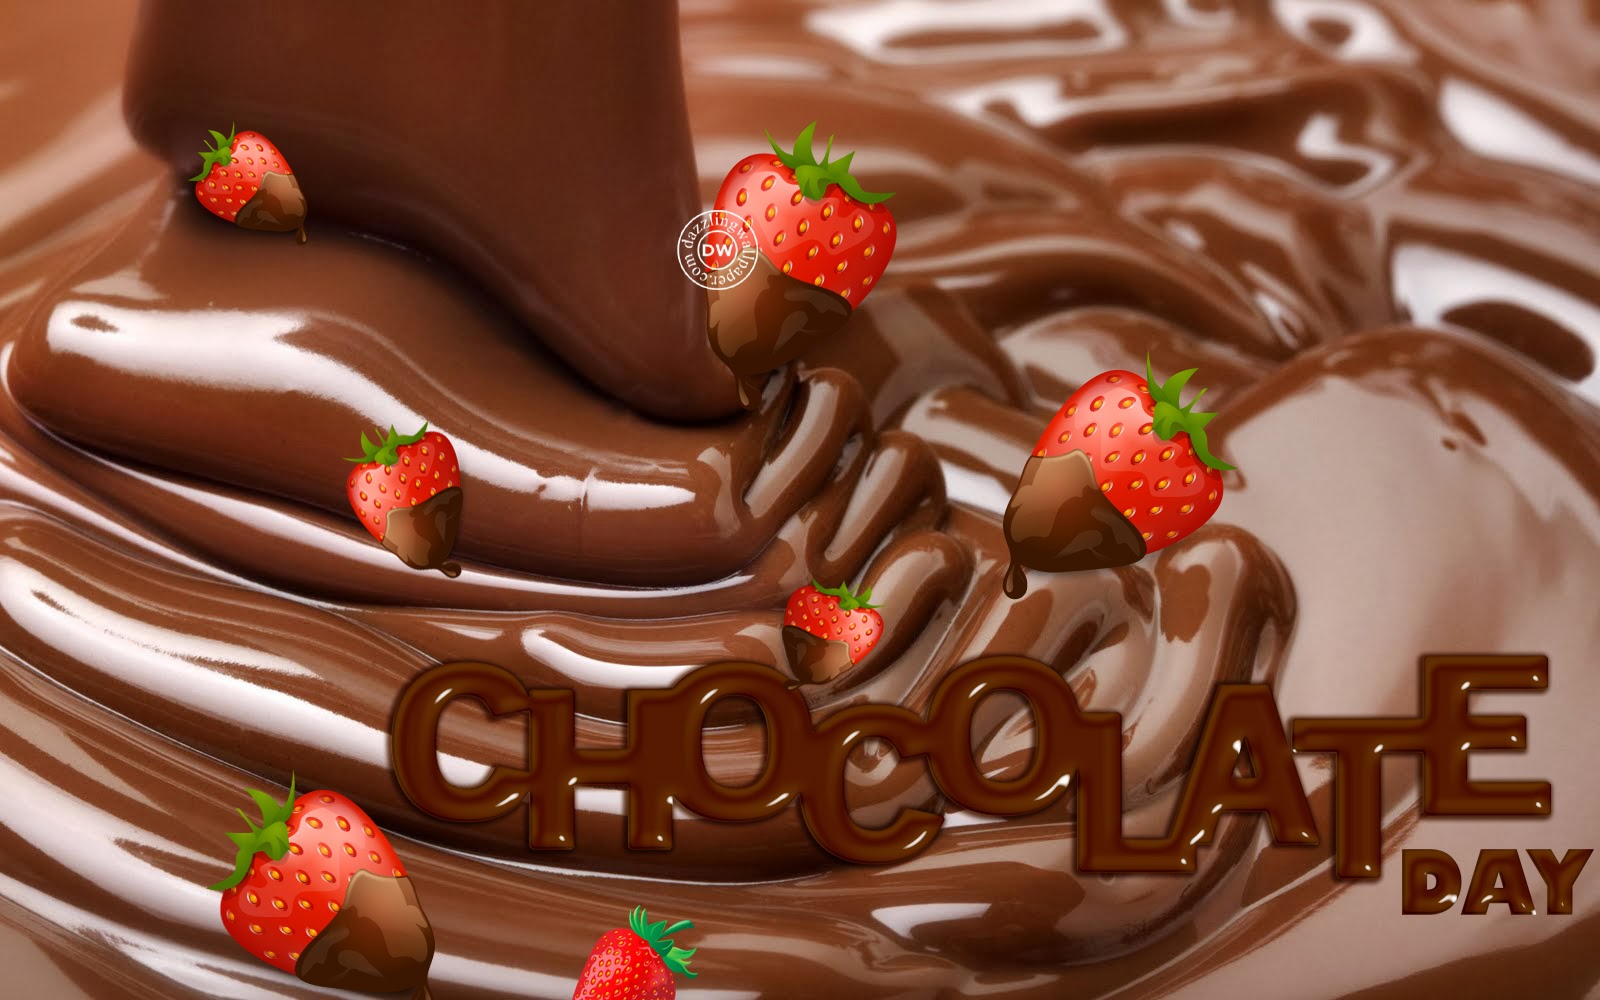 Happy Chocolate Day 2014 Hd Wallpapers Download - Hd Wallpaper Chocolate Day Images Download , HD Wallpaper & Backgrounds